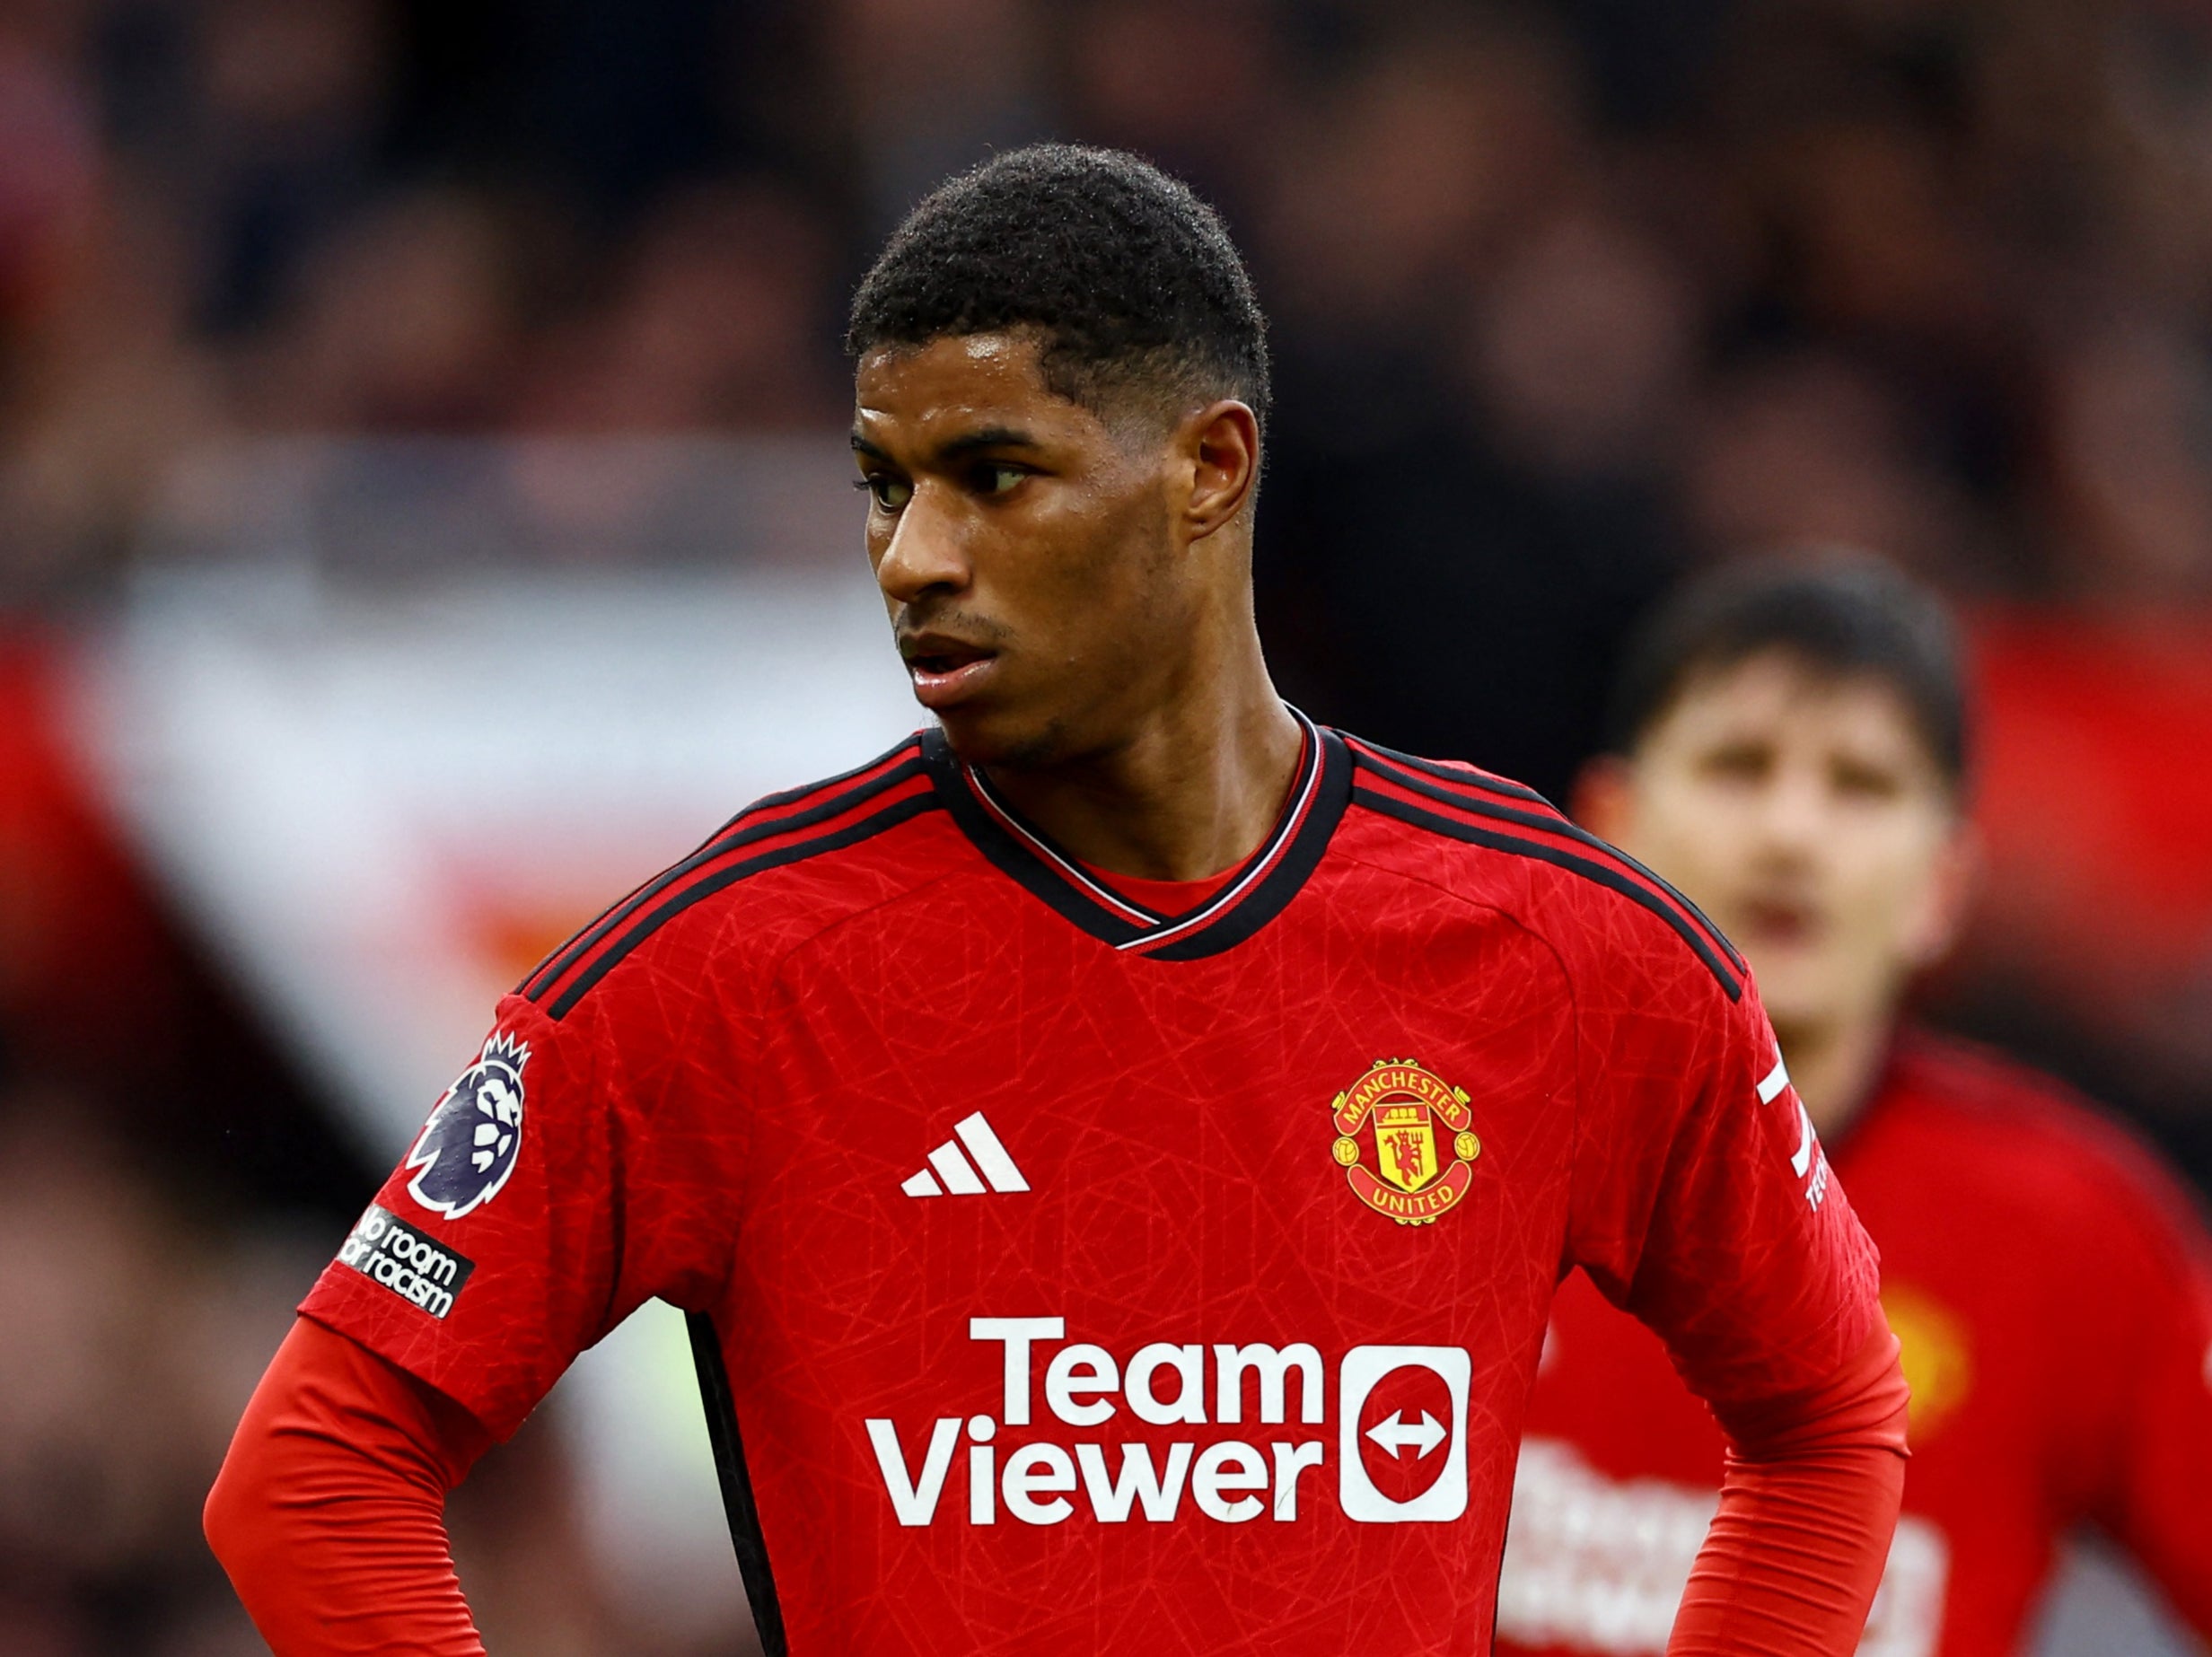 Marcus Rashford has responded after suffering abuse from fans